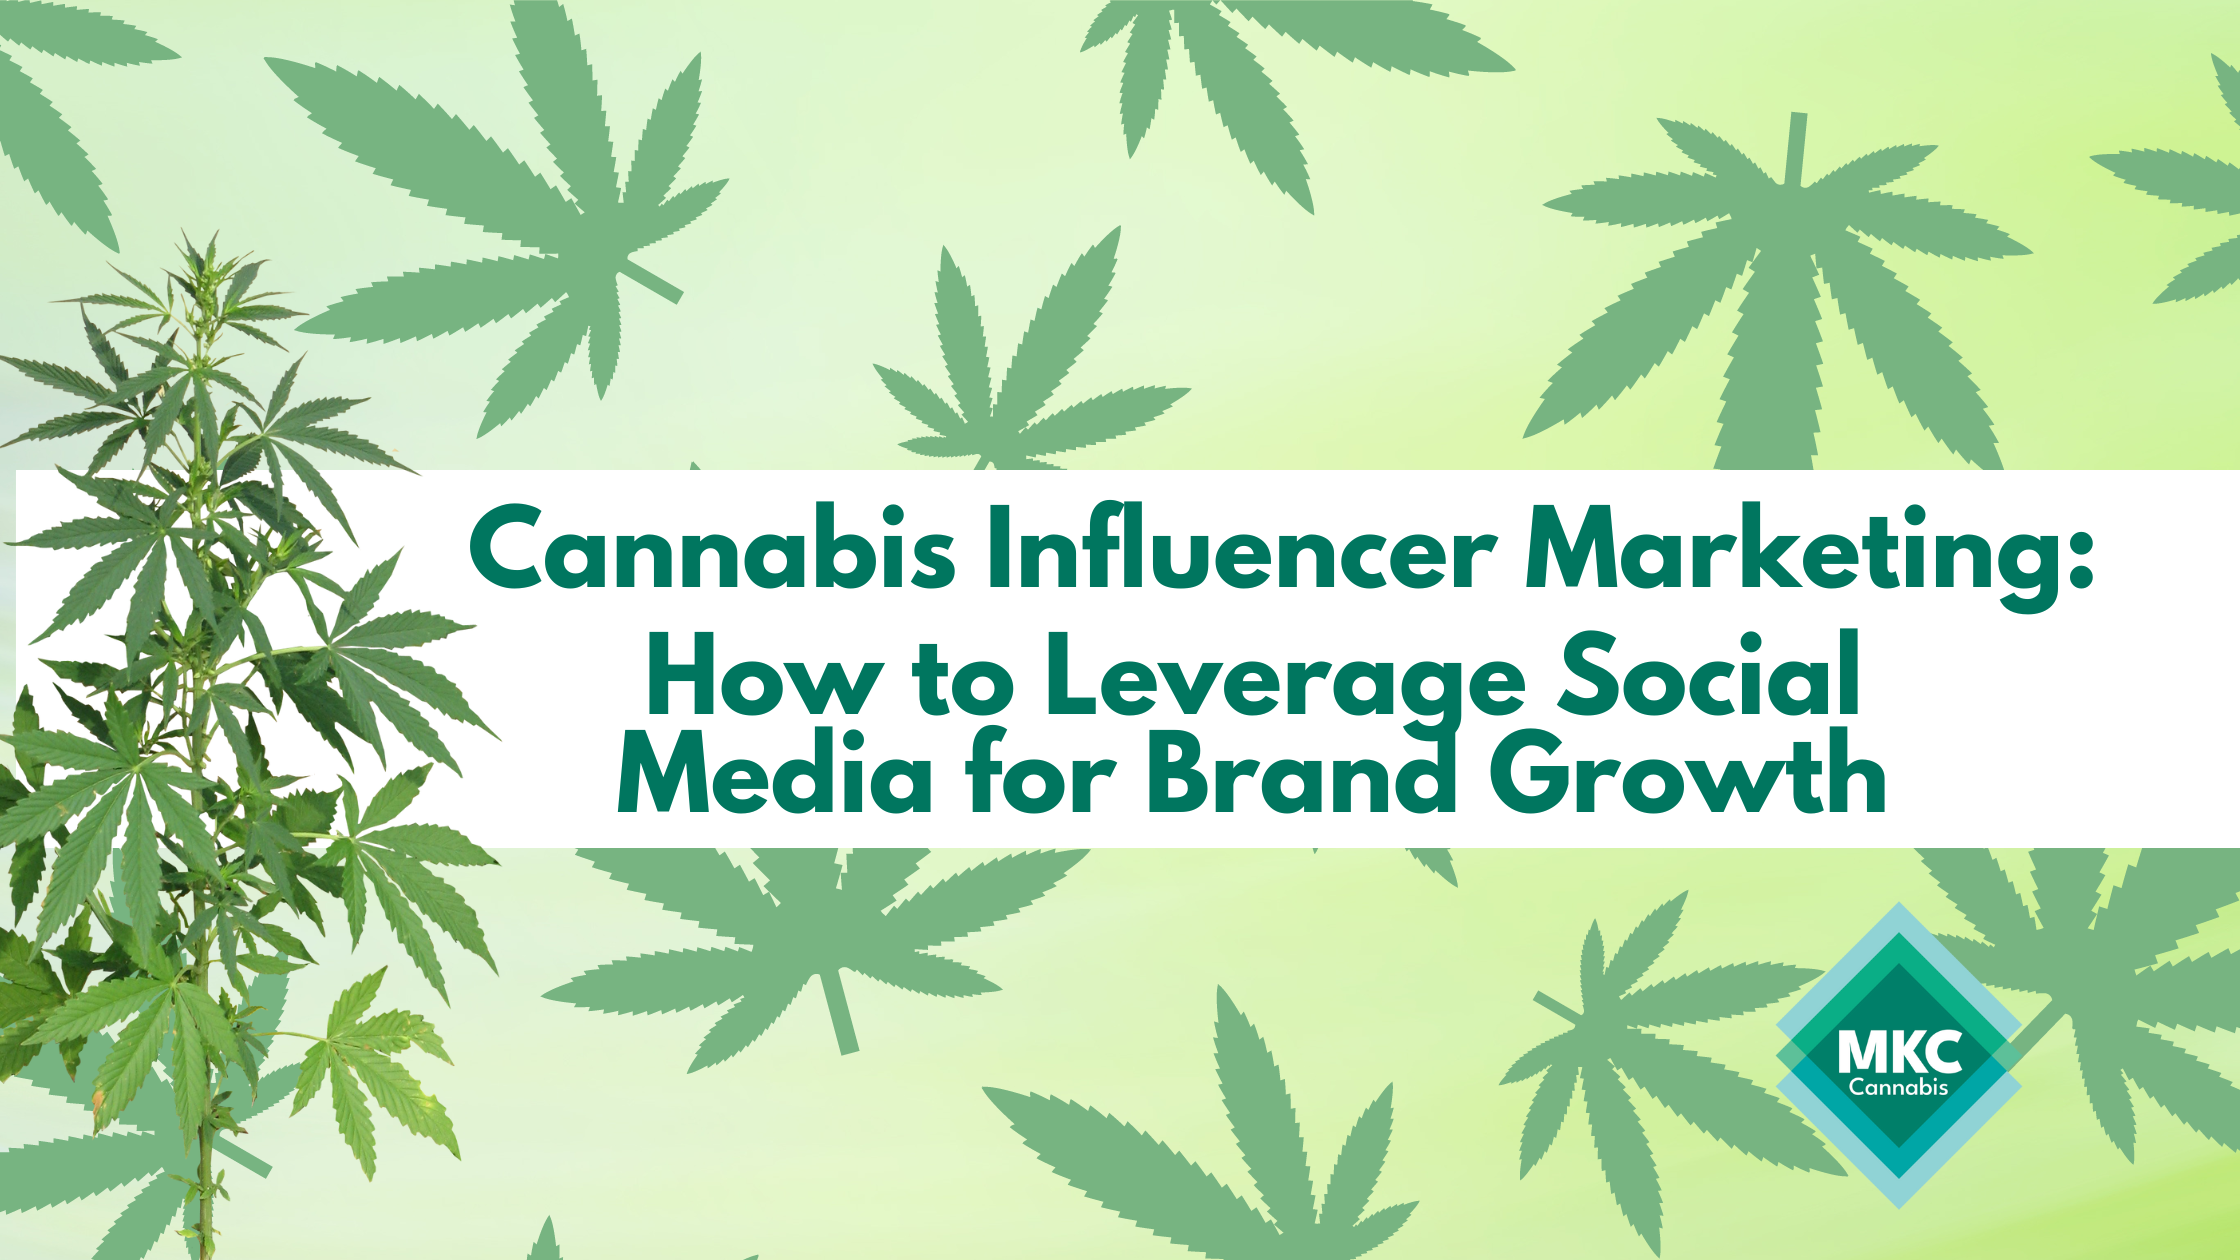 Cannabis Influencer Marketing: How to Leverage Social Media for Brand Growth